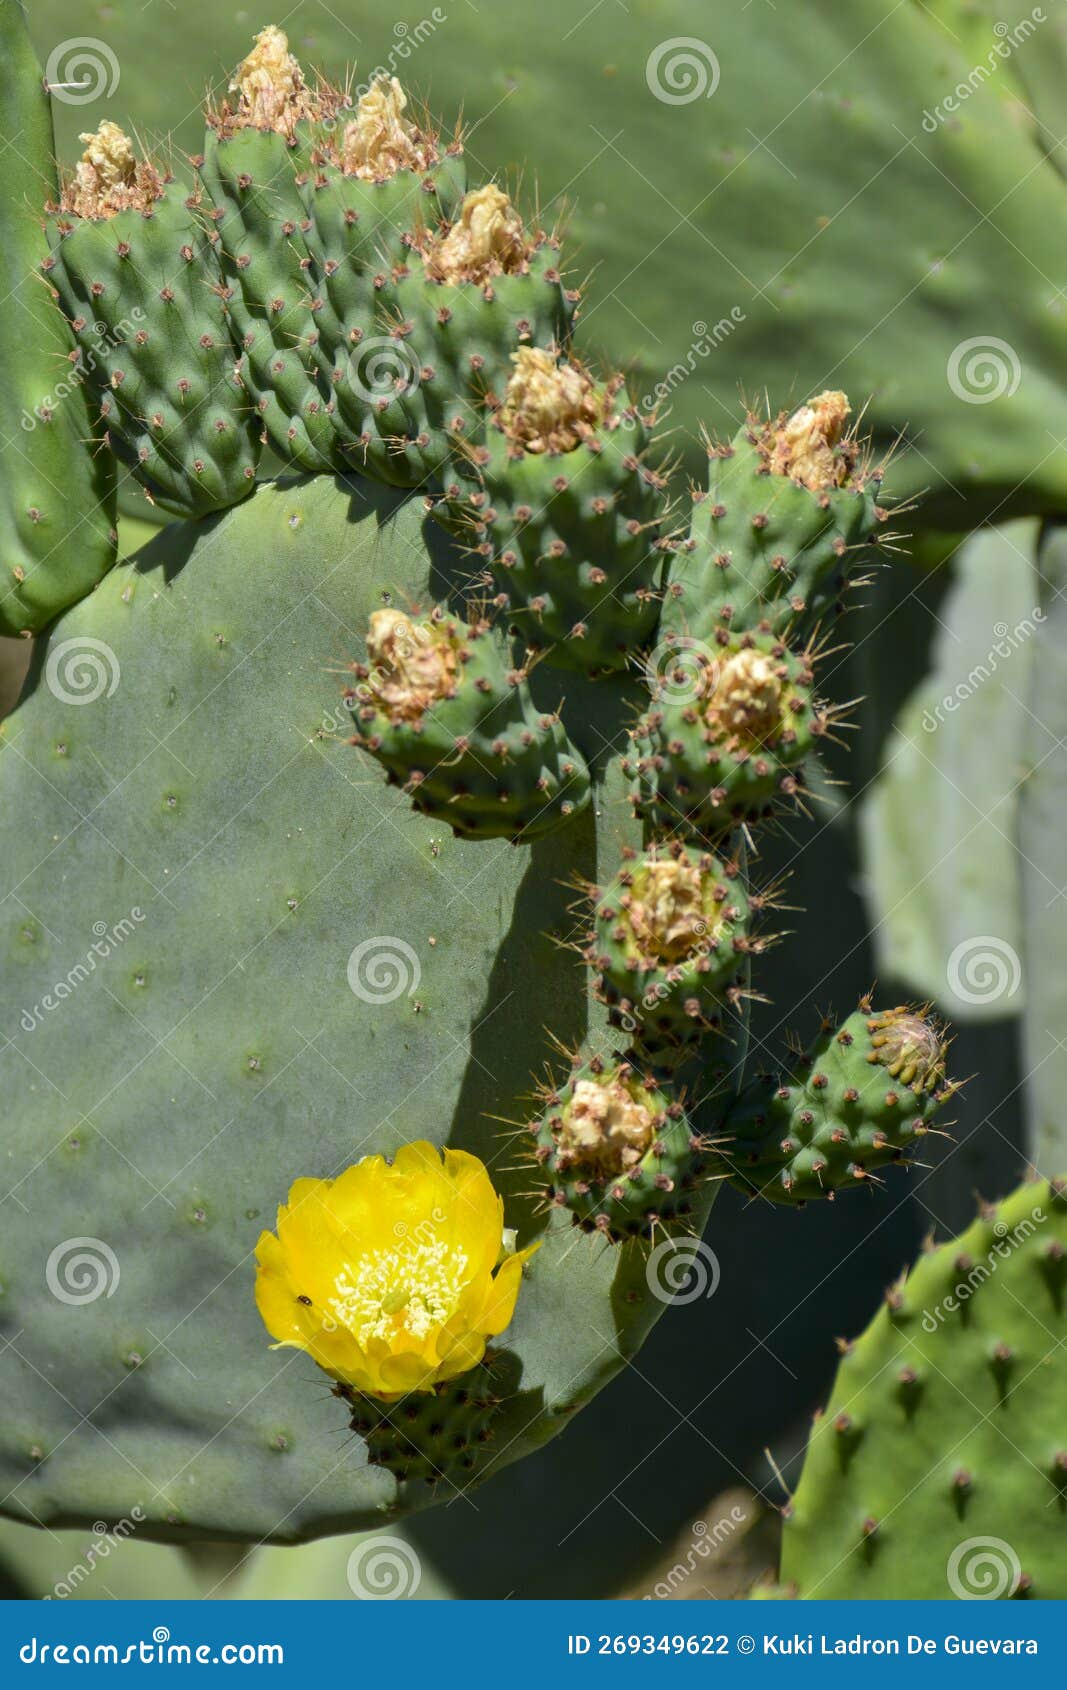 flowers and prickly pears on a prickly pear tree